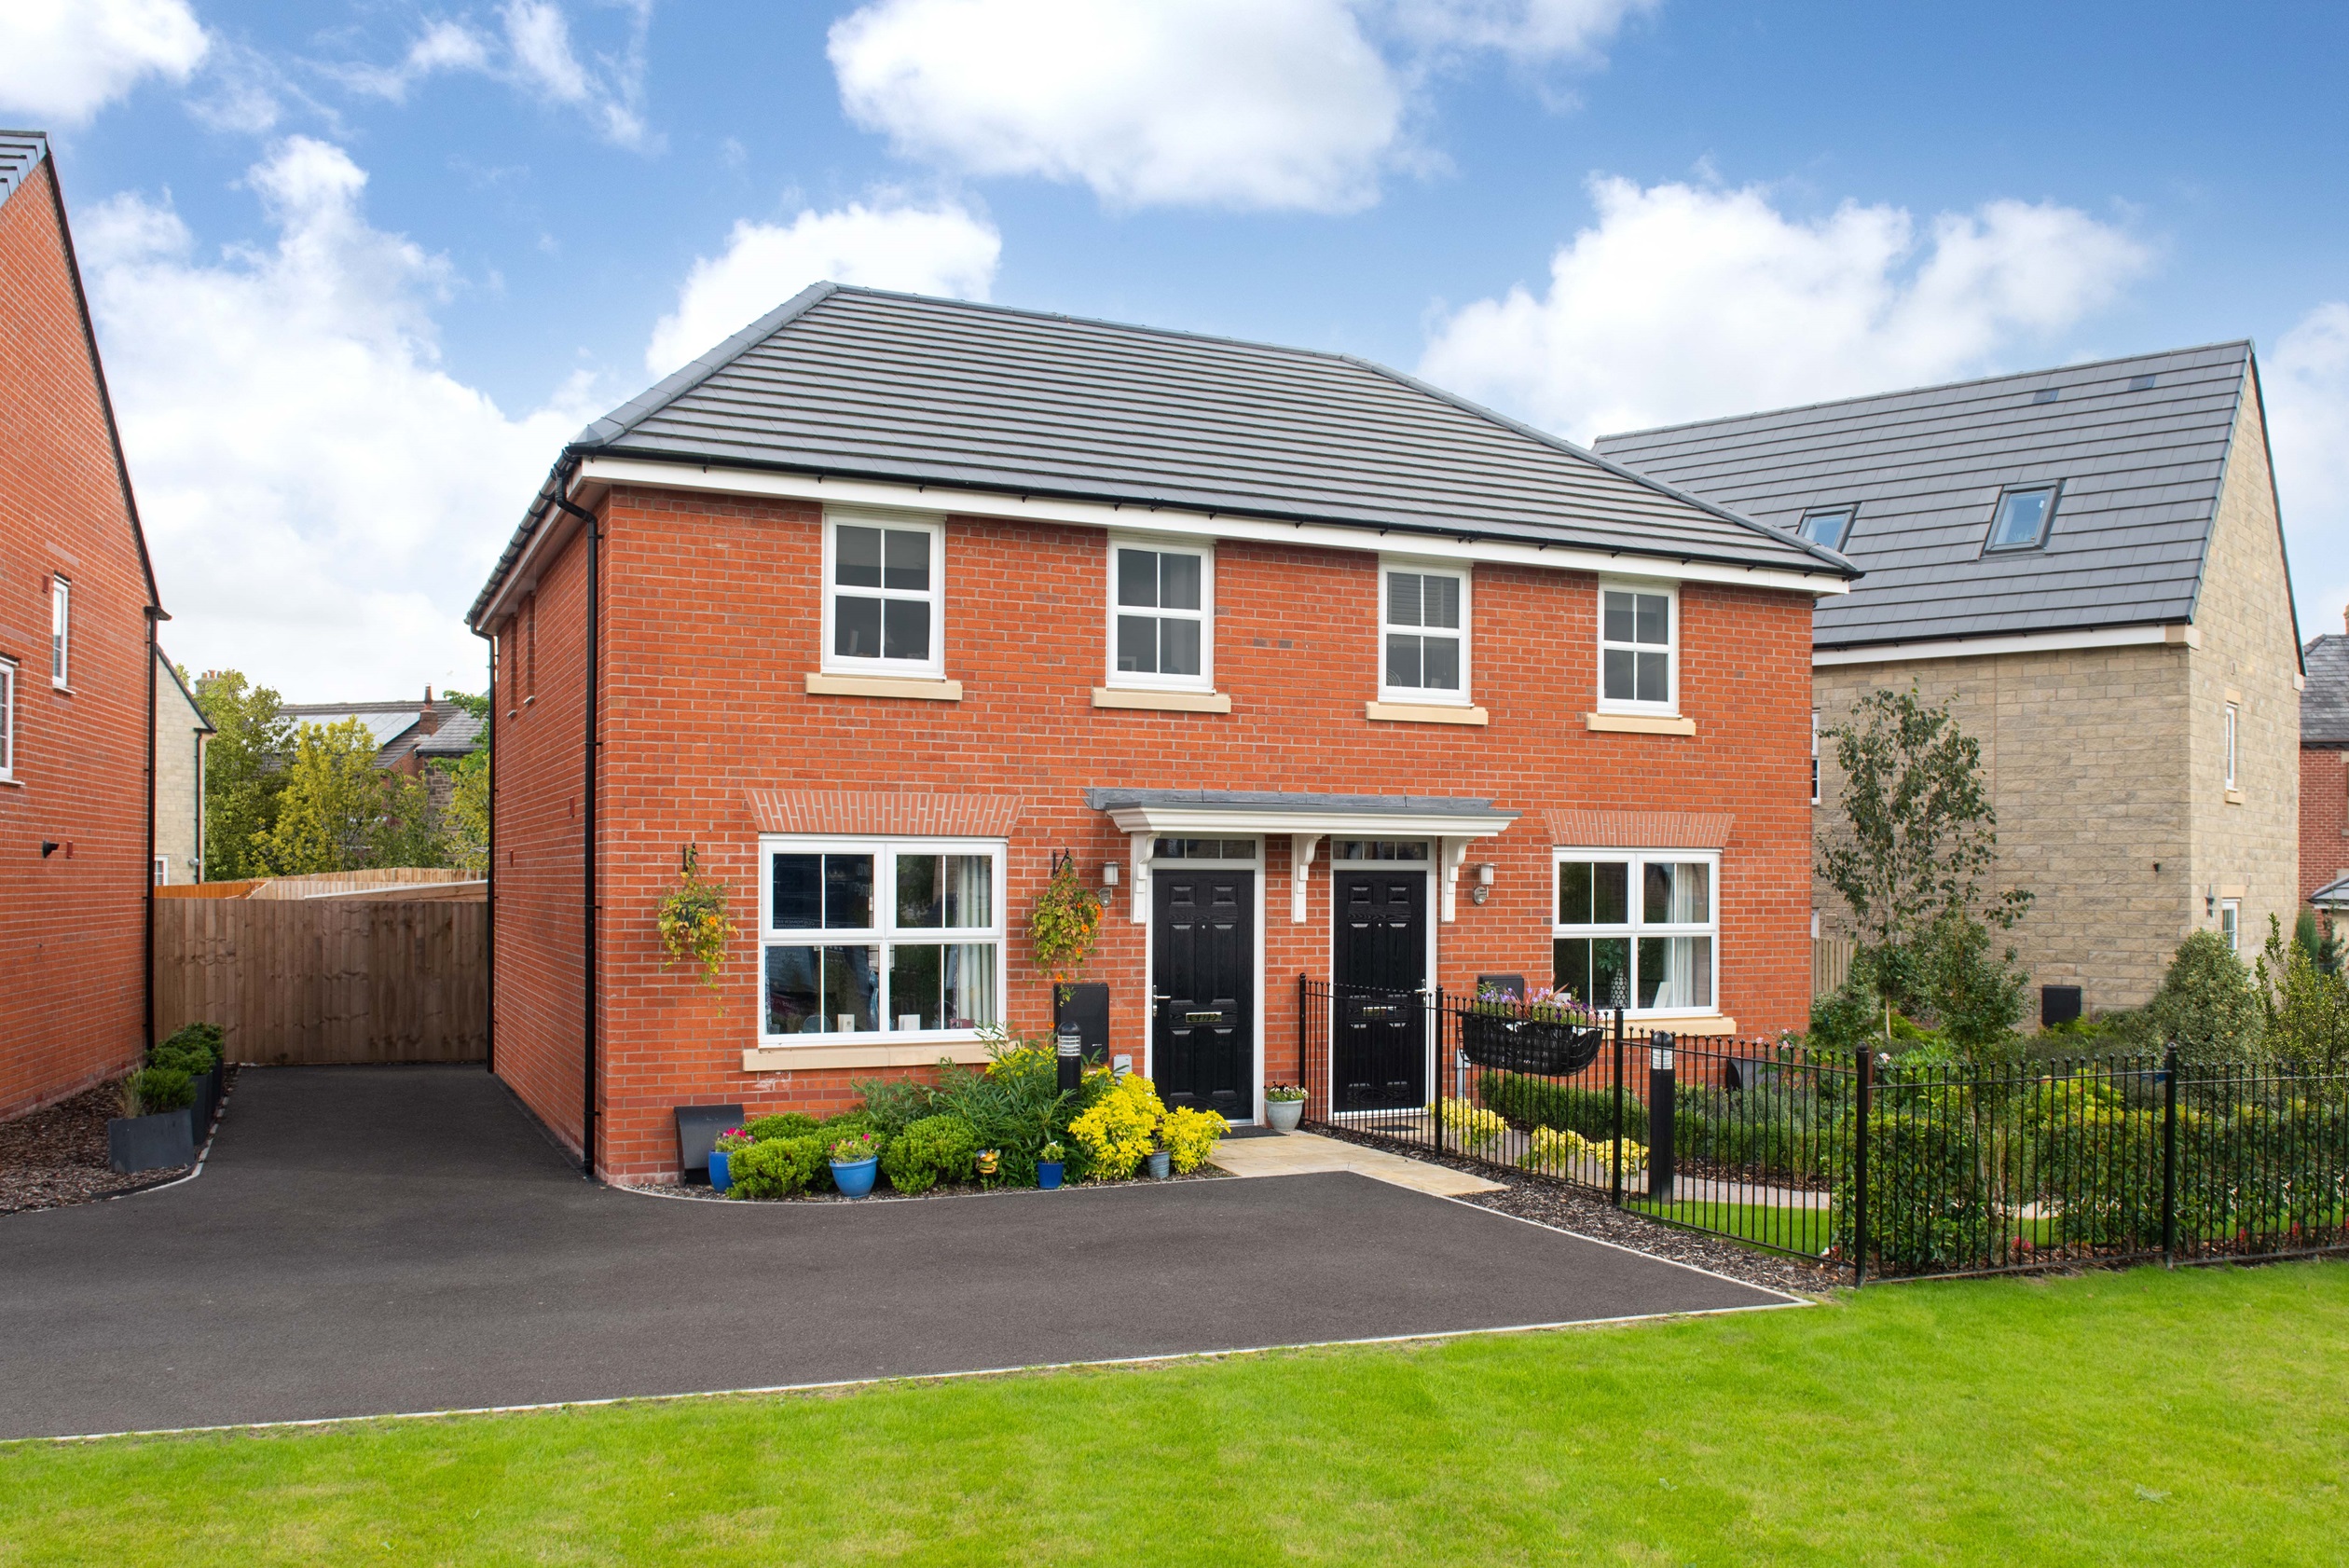 Property 1 of 7. External View Of The Archford Show Home At Inglewhite Meadows